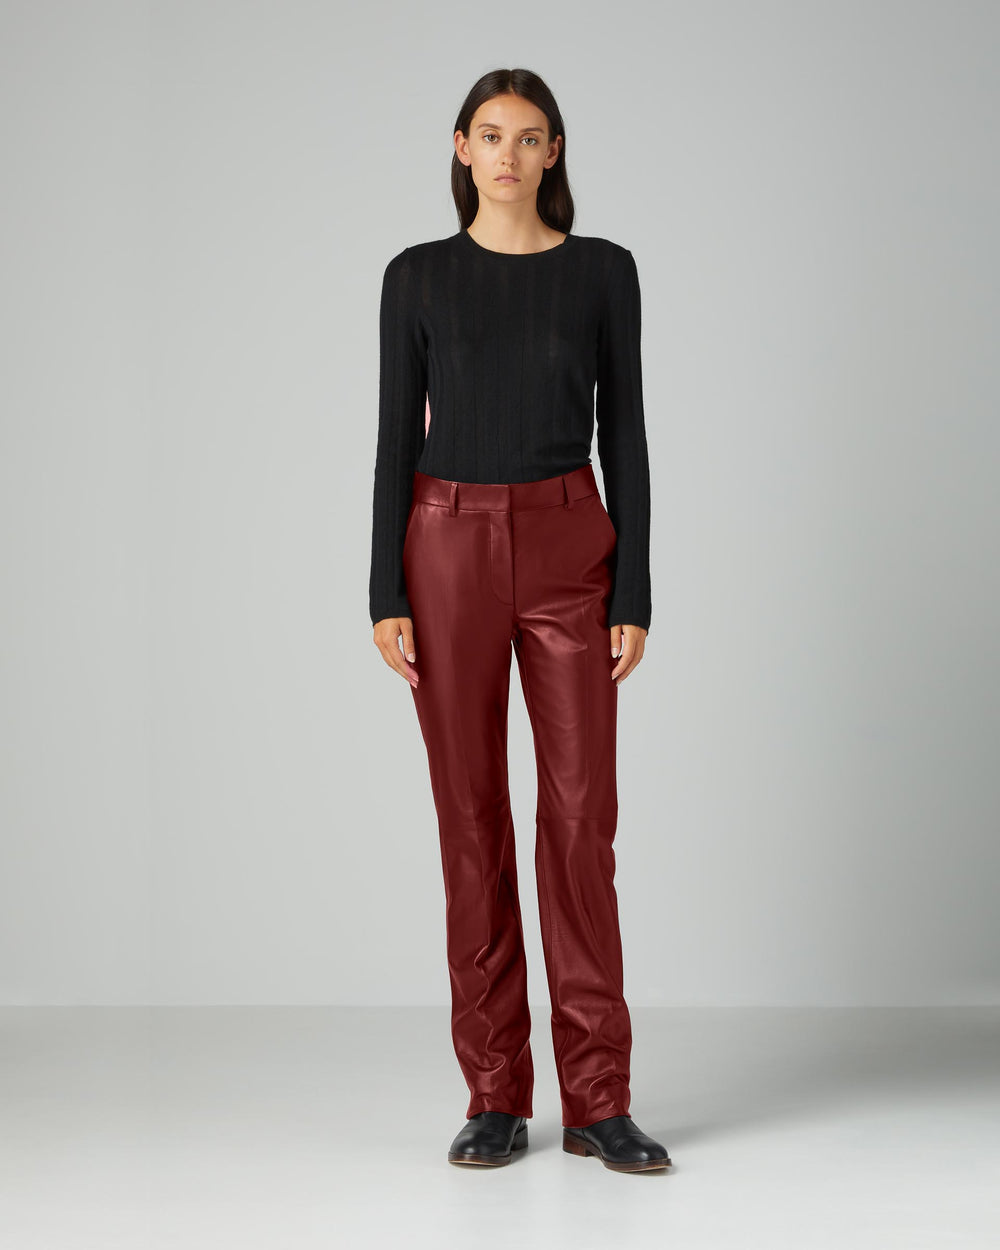 Mick Trouser in Nappa Leather, Burgundy